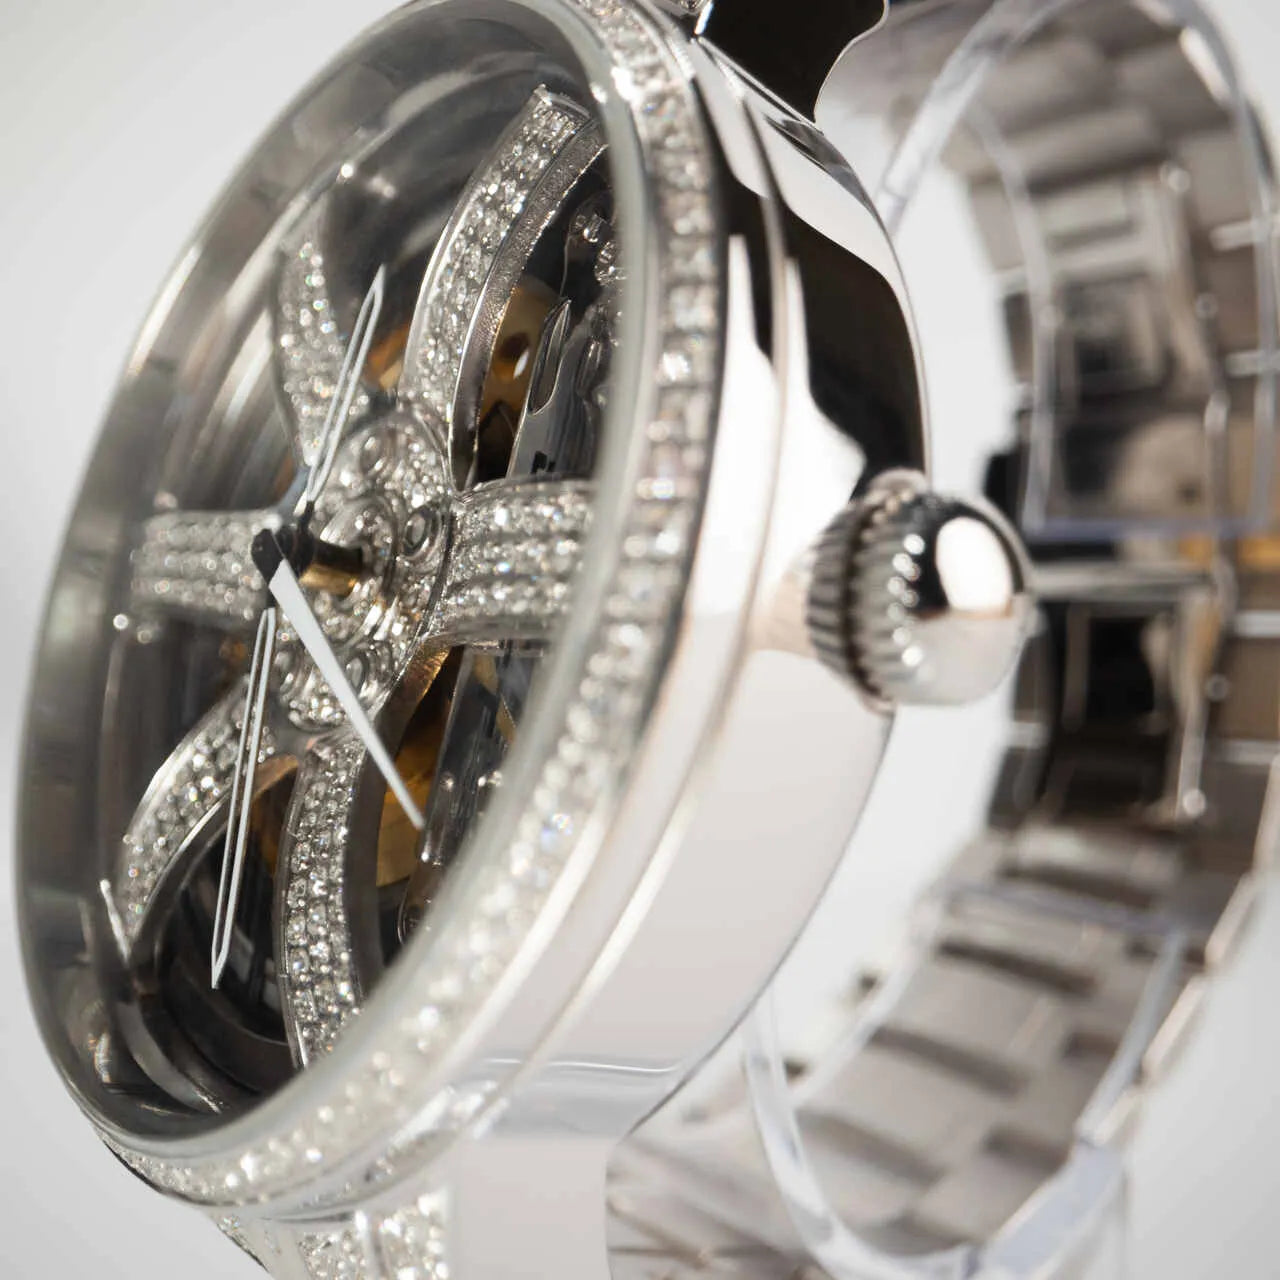 3RD ANNIVERSARY Orologio ICED OUT VVS-EDITION